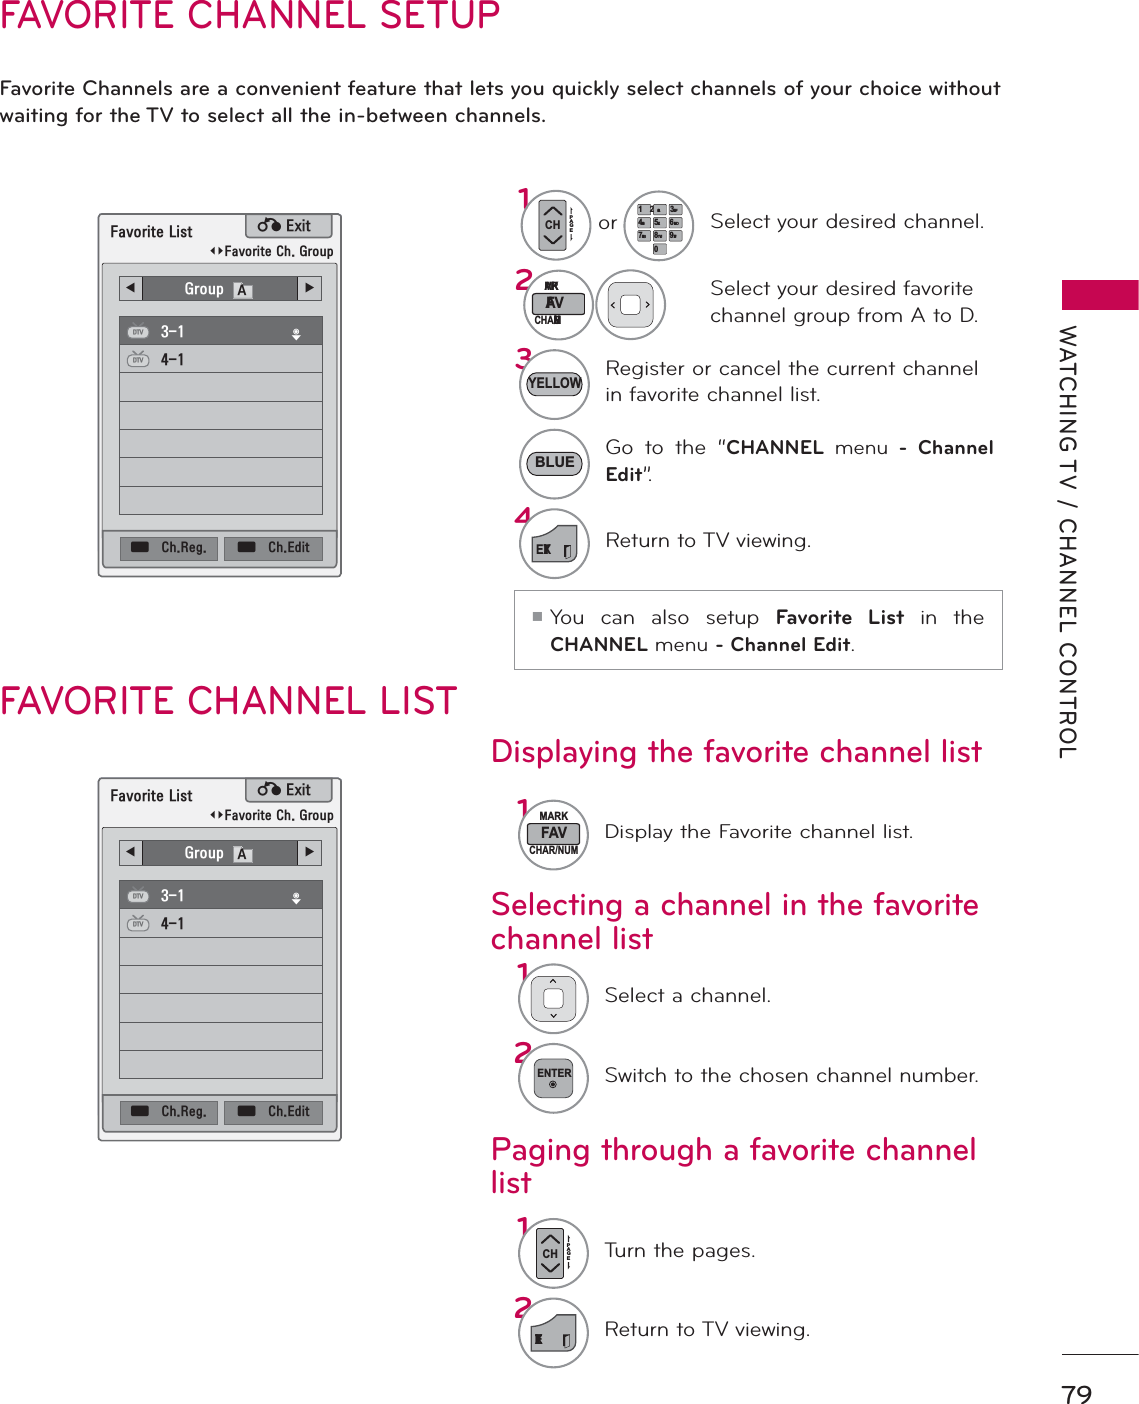 79WATCHING TV / CHANNEL CONTROLFAVORITE CHANNEL SETUPFavorite Channels are a convenient feature that lets you quickly select channels of your choice without waiting for the TV to select all the in-between channels.1FAVMARKCHAR/NUMDisplay the Favorite channel list.1Select a channel.2ENTERSwitch to the chosen channel number.1CHPAGETurn the pages.2EXITReturn to TV viewing.ᯚᯛ)DYRULWH&amp;K*URXSᯚᯛ)DYRULWH&amp;K*URXS)DYRULWH/LVW)DYRULWH/LVWᰙ([LWᰙ([LW܁*URXSA۽܁*URXSA۽DTVDTVDTVDTVᯕ&amp;K5HJᯕ&amp;K5HJᯕ&amp;K(GLWᯕ&amp;K(GLWFAVORITE CHANNEL LISTSelecting a channel in the favorite channel listPaging through a favorite channel listDisplaying the favorite channel list12 ABC 3 DEF4 GHI 5 JKL 6MNO7PQRS8 TUV09WXYZ1orCHPAGESelect your desired channel.2FAVMARKCHAR/NUMSelect your desired favorite channel group from A to D.3Register or cancel the current channel in favorite channel list.Go to the “CHANNEL menu - Channel Edit”.4EXITReturn to TV viewing.YELLOWBLUEᯫYou can also setup Favorite List in the CHANNEL menu - Channel Edit.ᯱᯙᯱᯙ